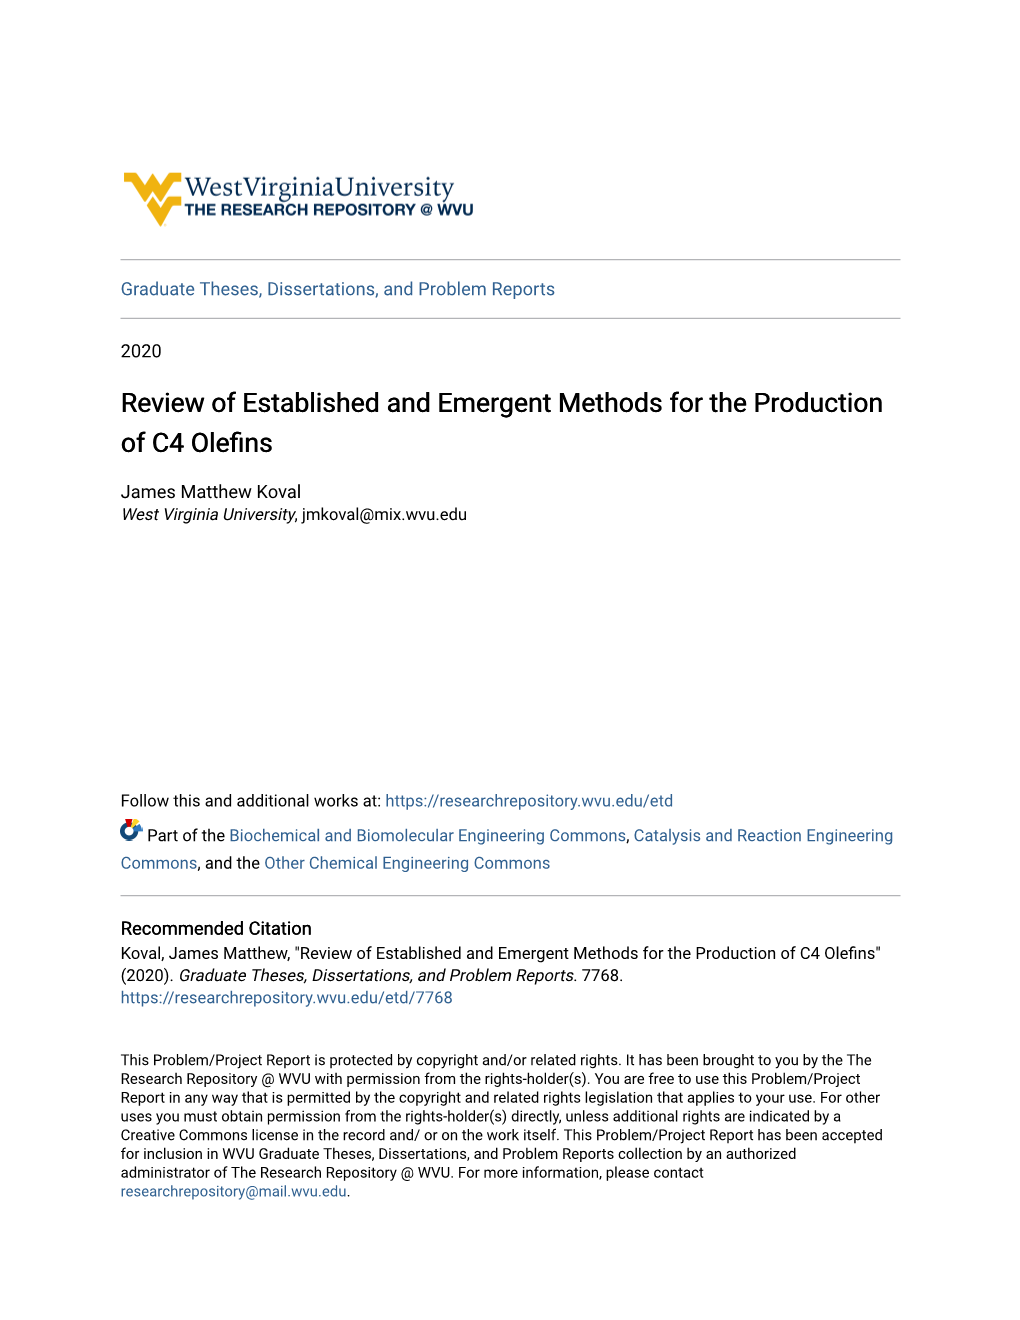 Review of Established and Emergent Methods for the Production of C4 Olefins